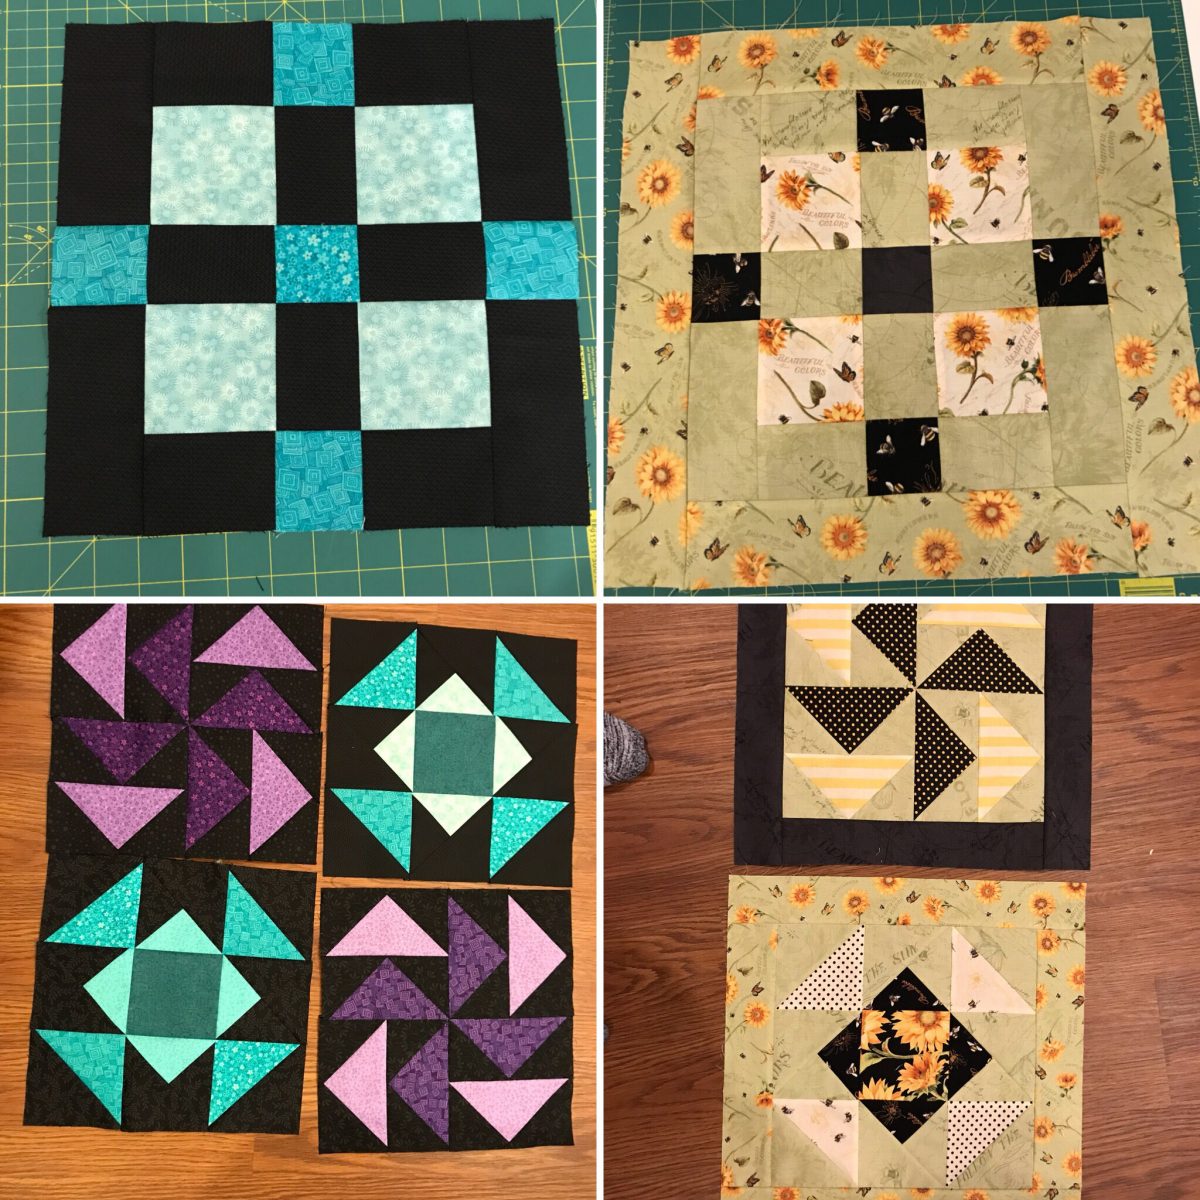 Quilt Diary: March 12 Update on quarter goals